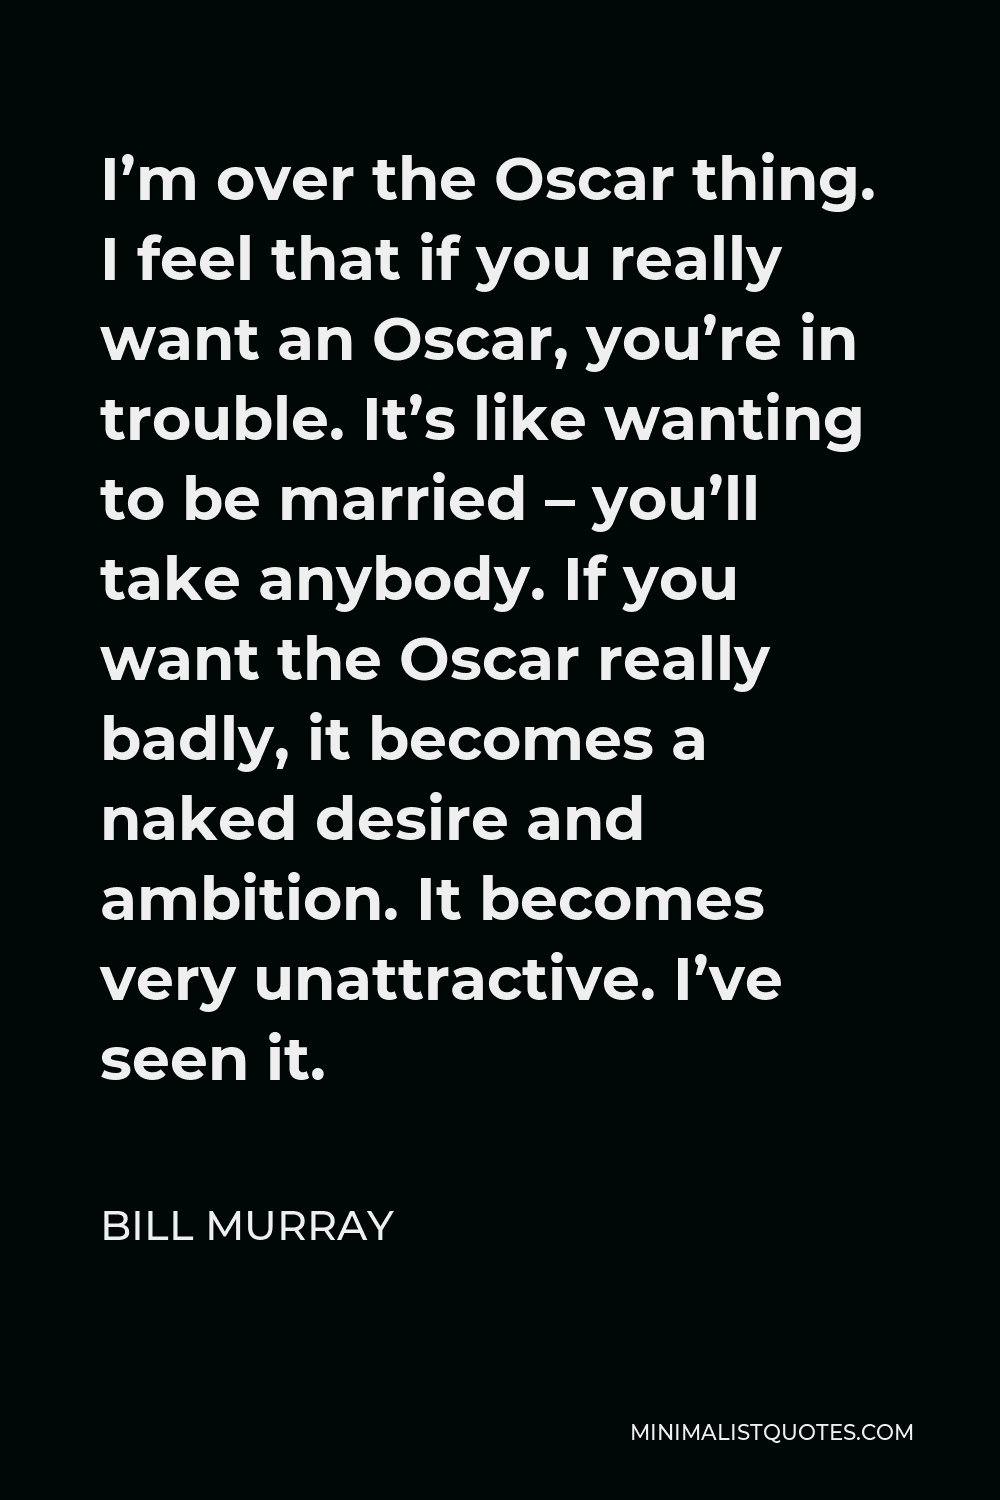 Bill Murray Quote - I’m over the Oscar thing. I feel that if you really want an Oscar, you’re in trouble. It’s like wanting to be married – you’ll take anybody. If you want the Oscar really badly, it becomes a naked desire and ambition. It becomes very unattractive. I’ve seen it.